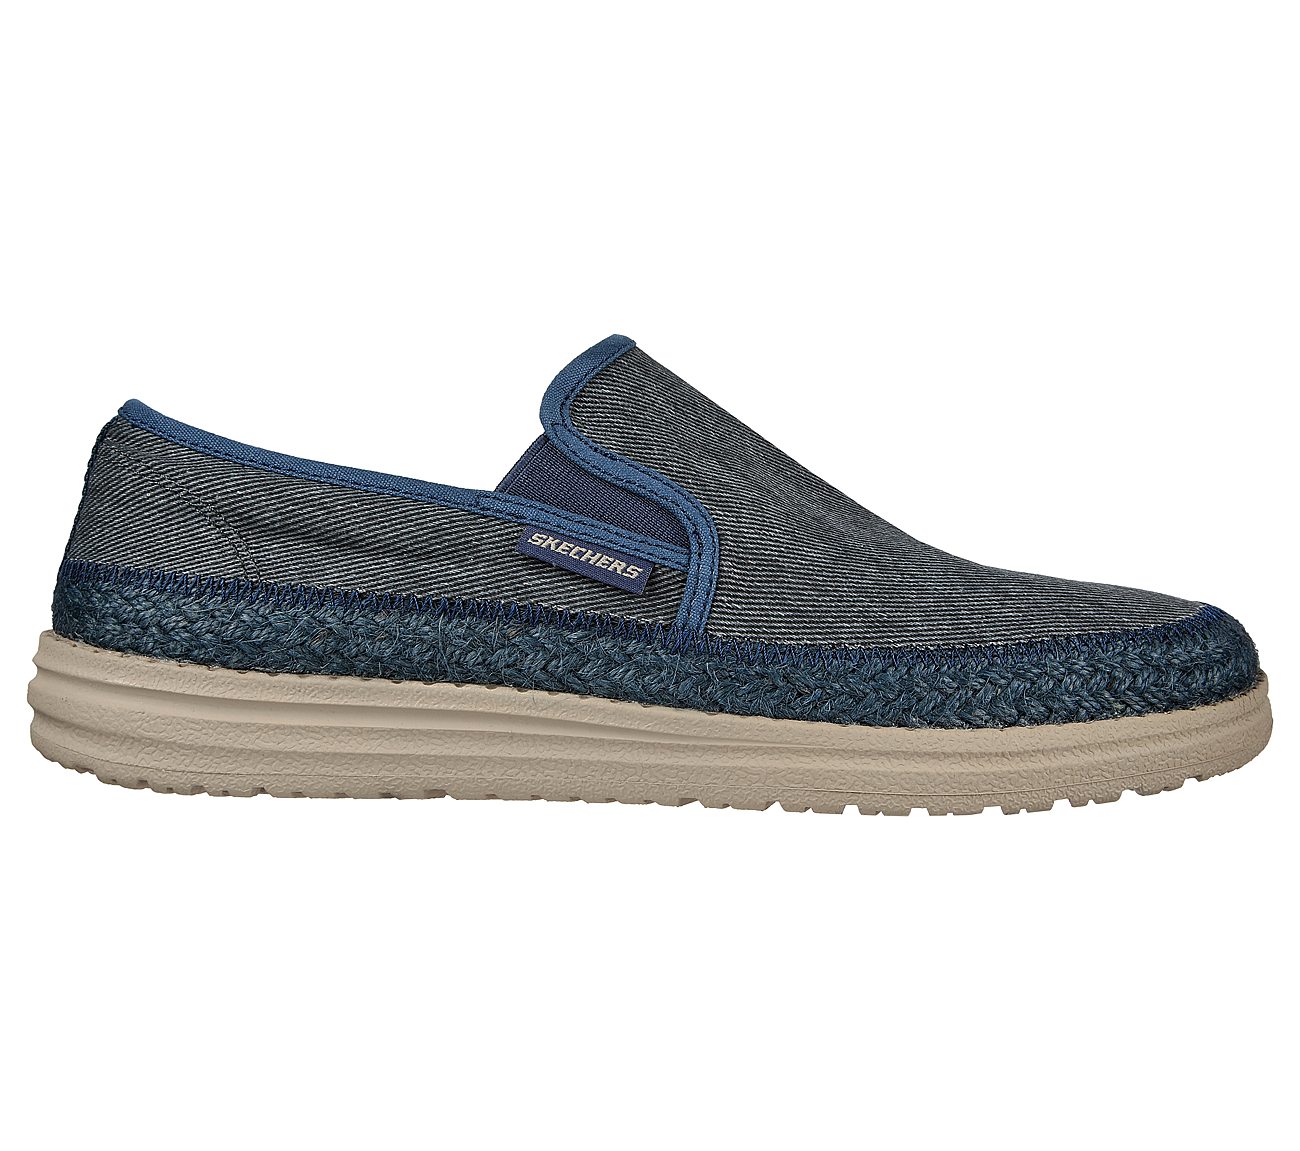 Buy SKECHERS Relaxed Fit: Melson - Braga USA Casuals Shoes